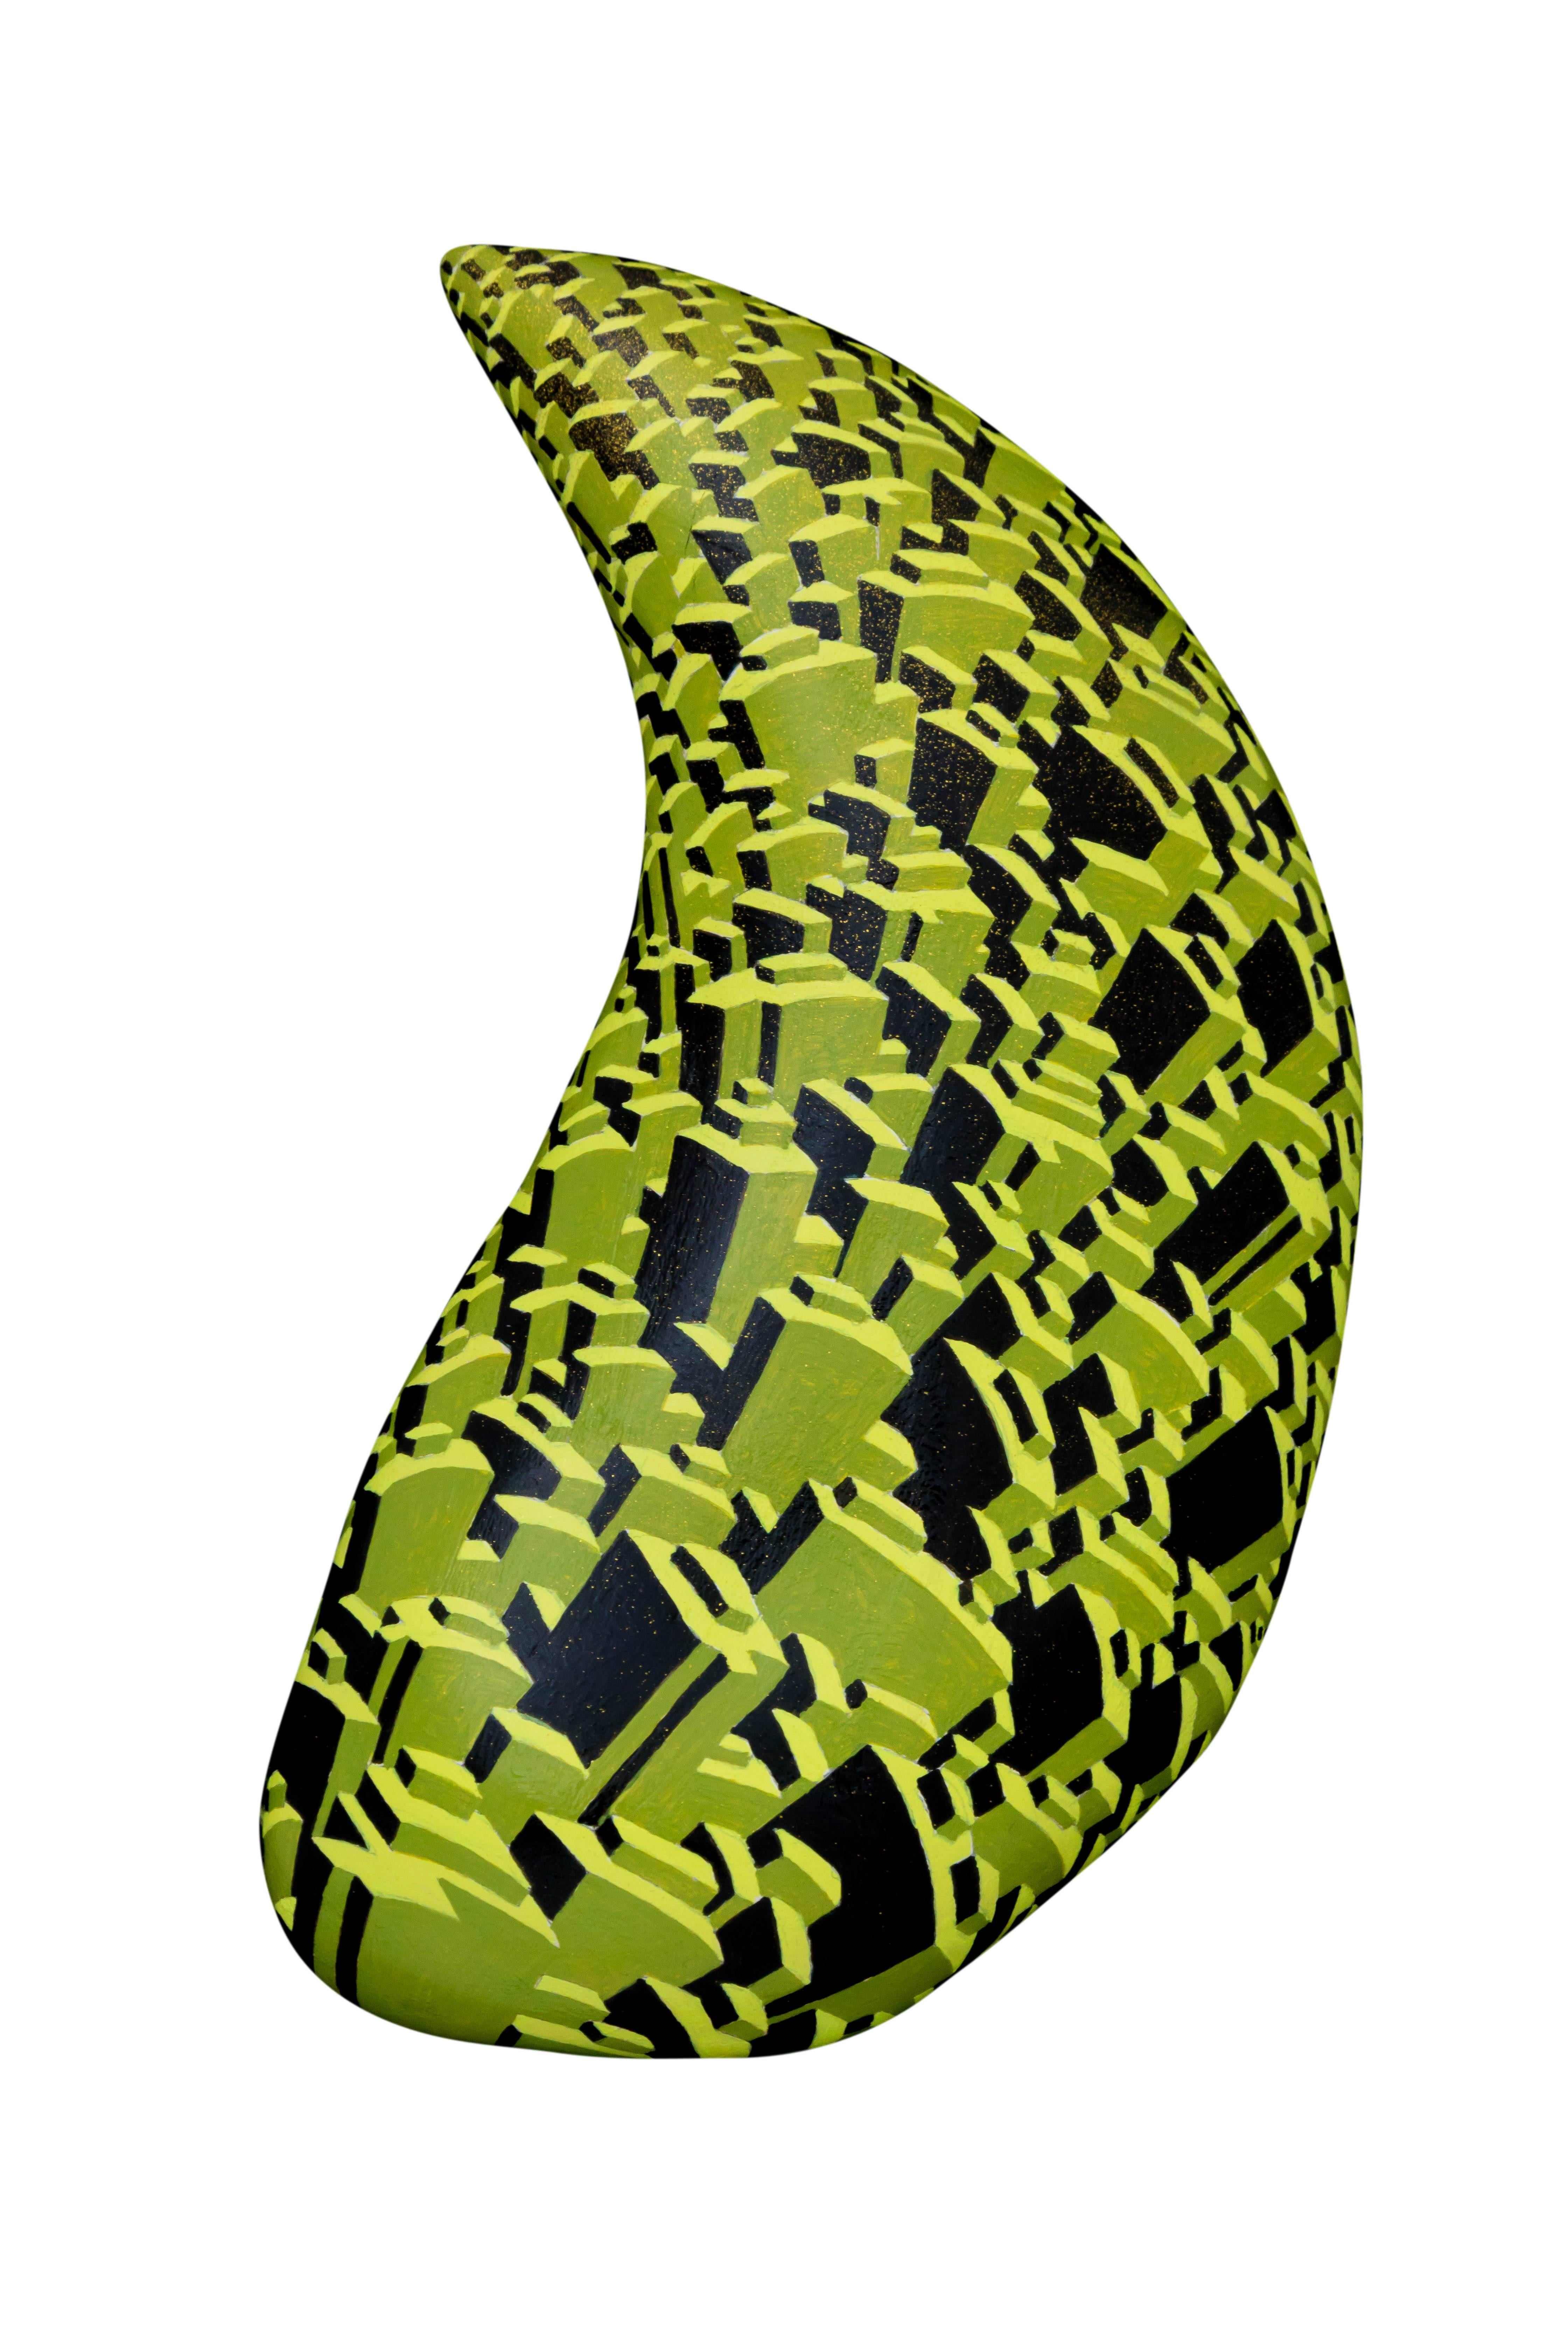 Satoshi Koyama Abstract Sculpture - Life City "Jewelry Y " Lime green wall sculpture: oil painting on paulownia wood